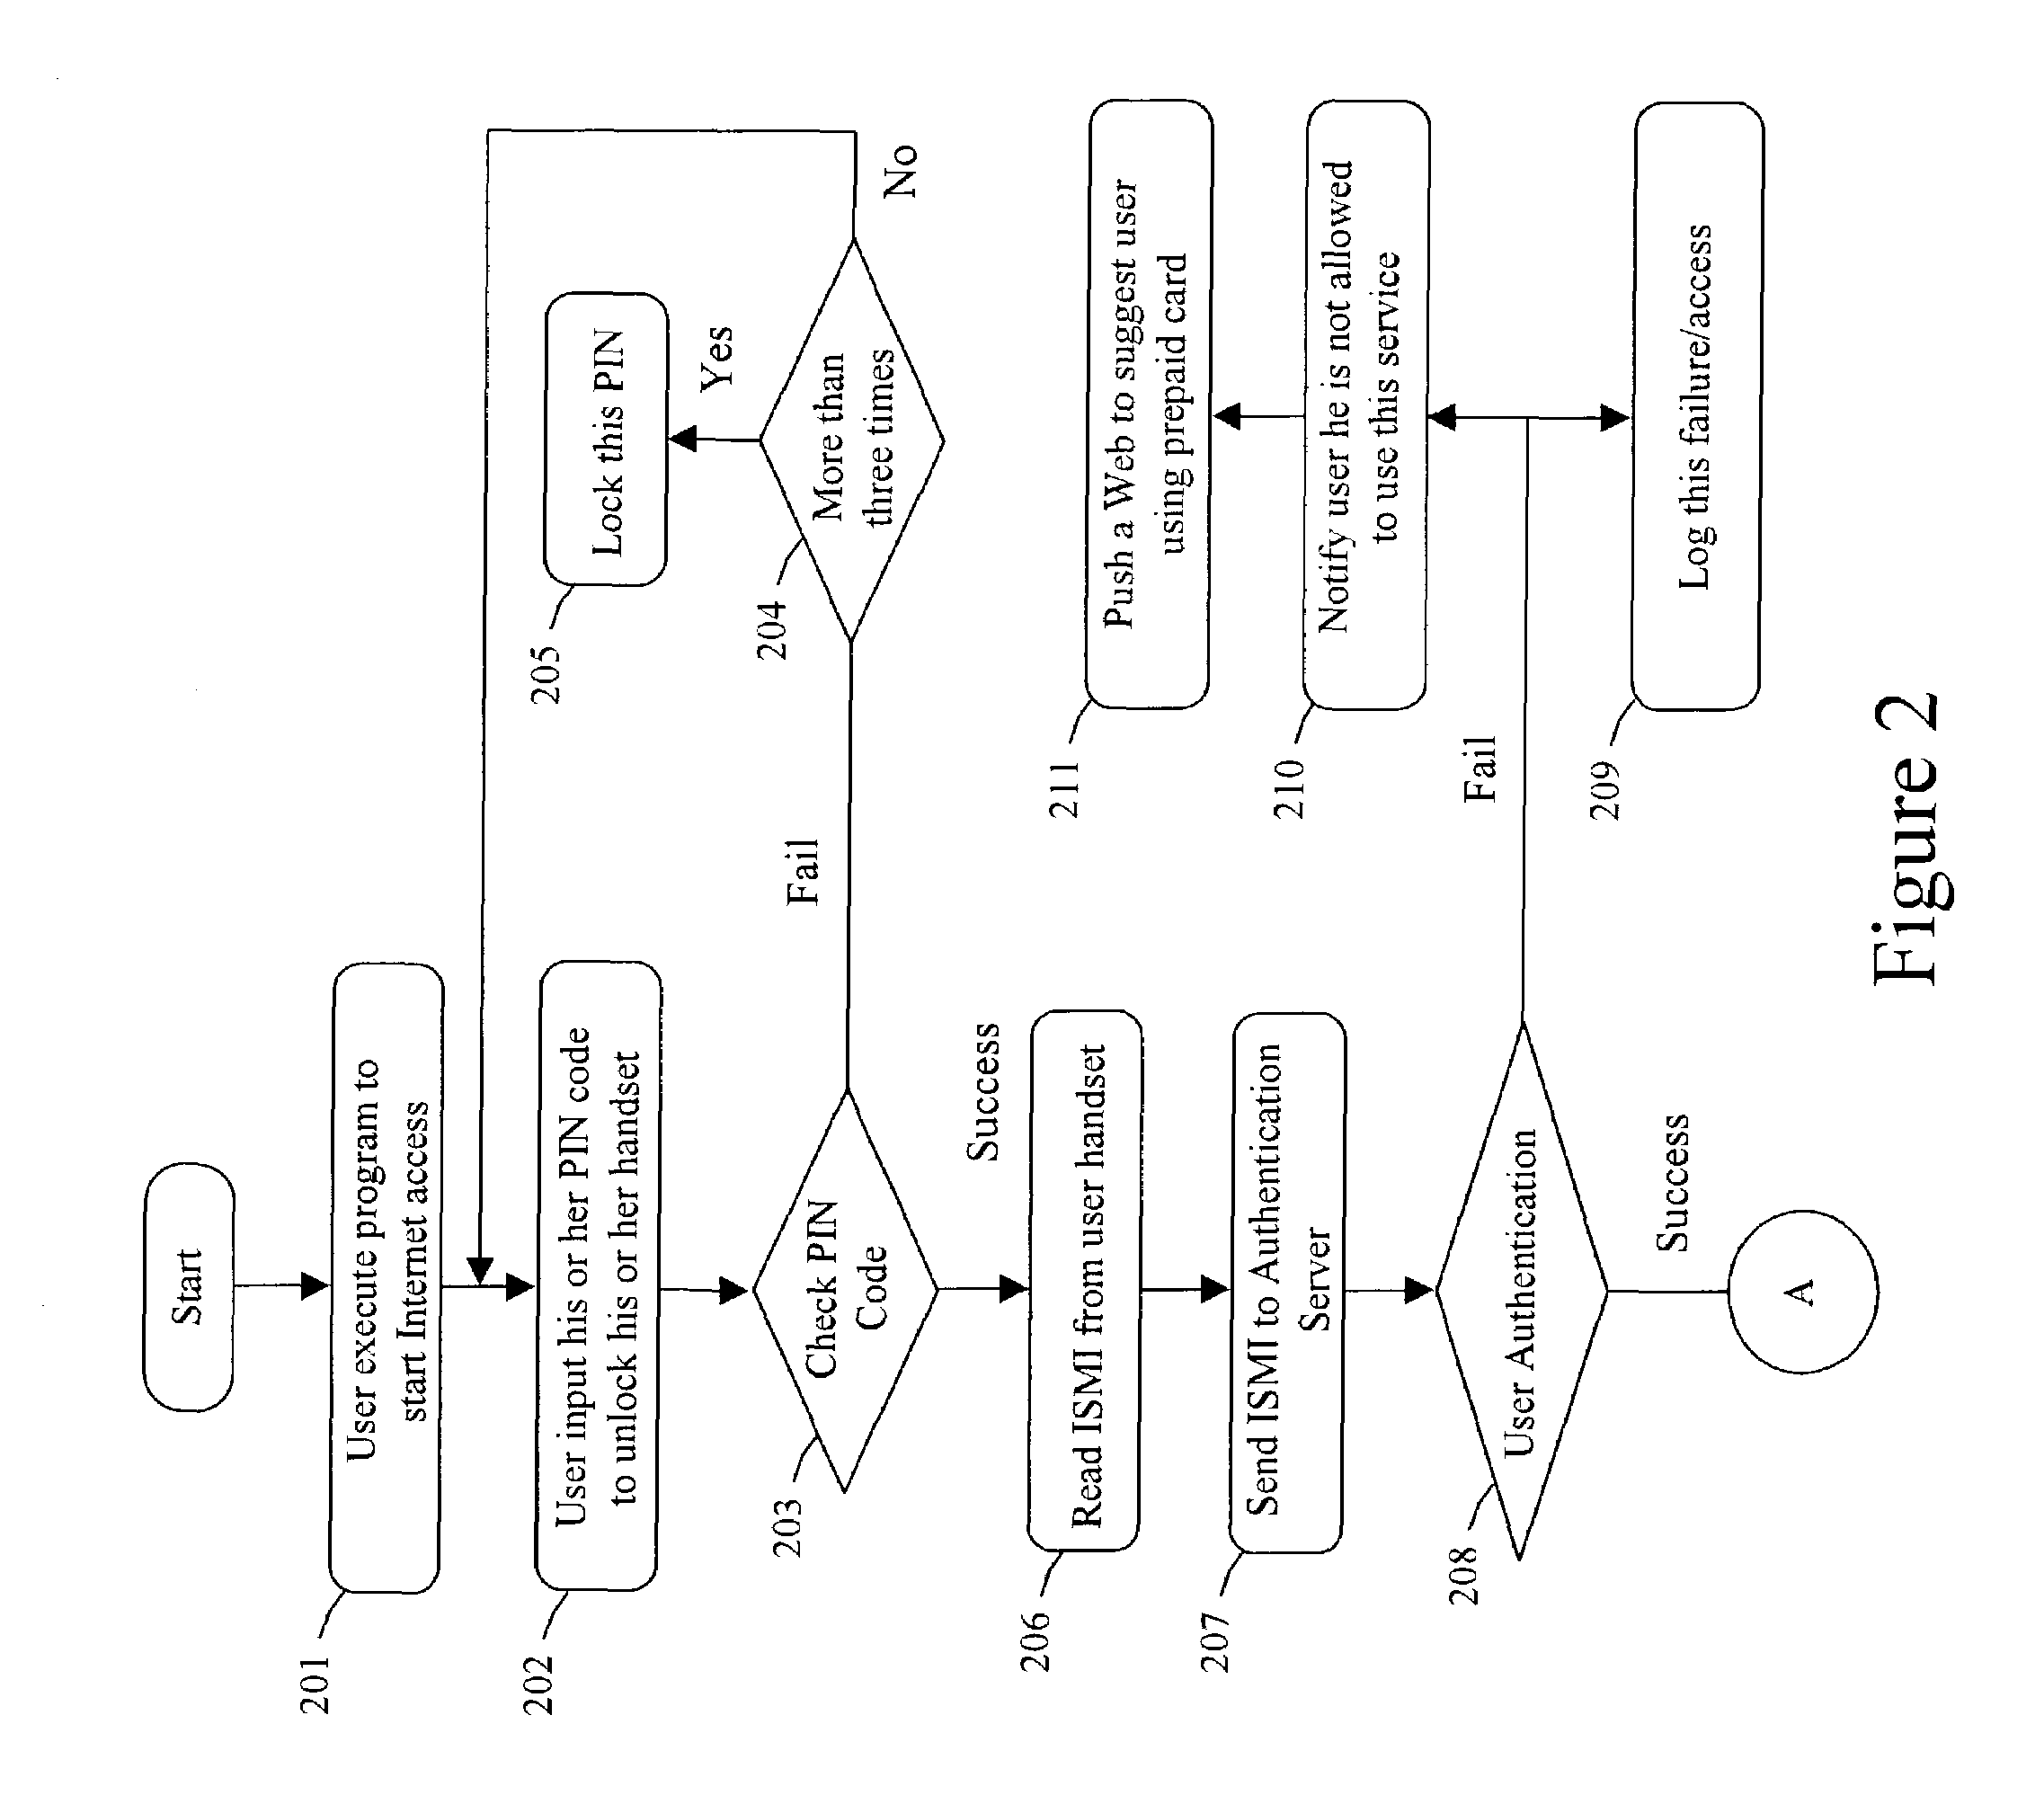 Wireless LAN authentication, authorization, and accounting system and method utilizing a telecommunications network